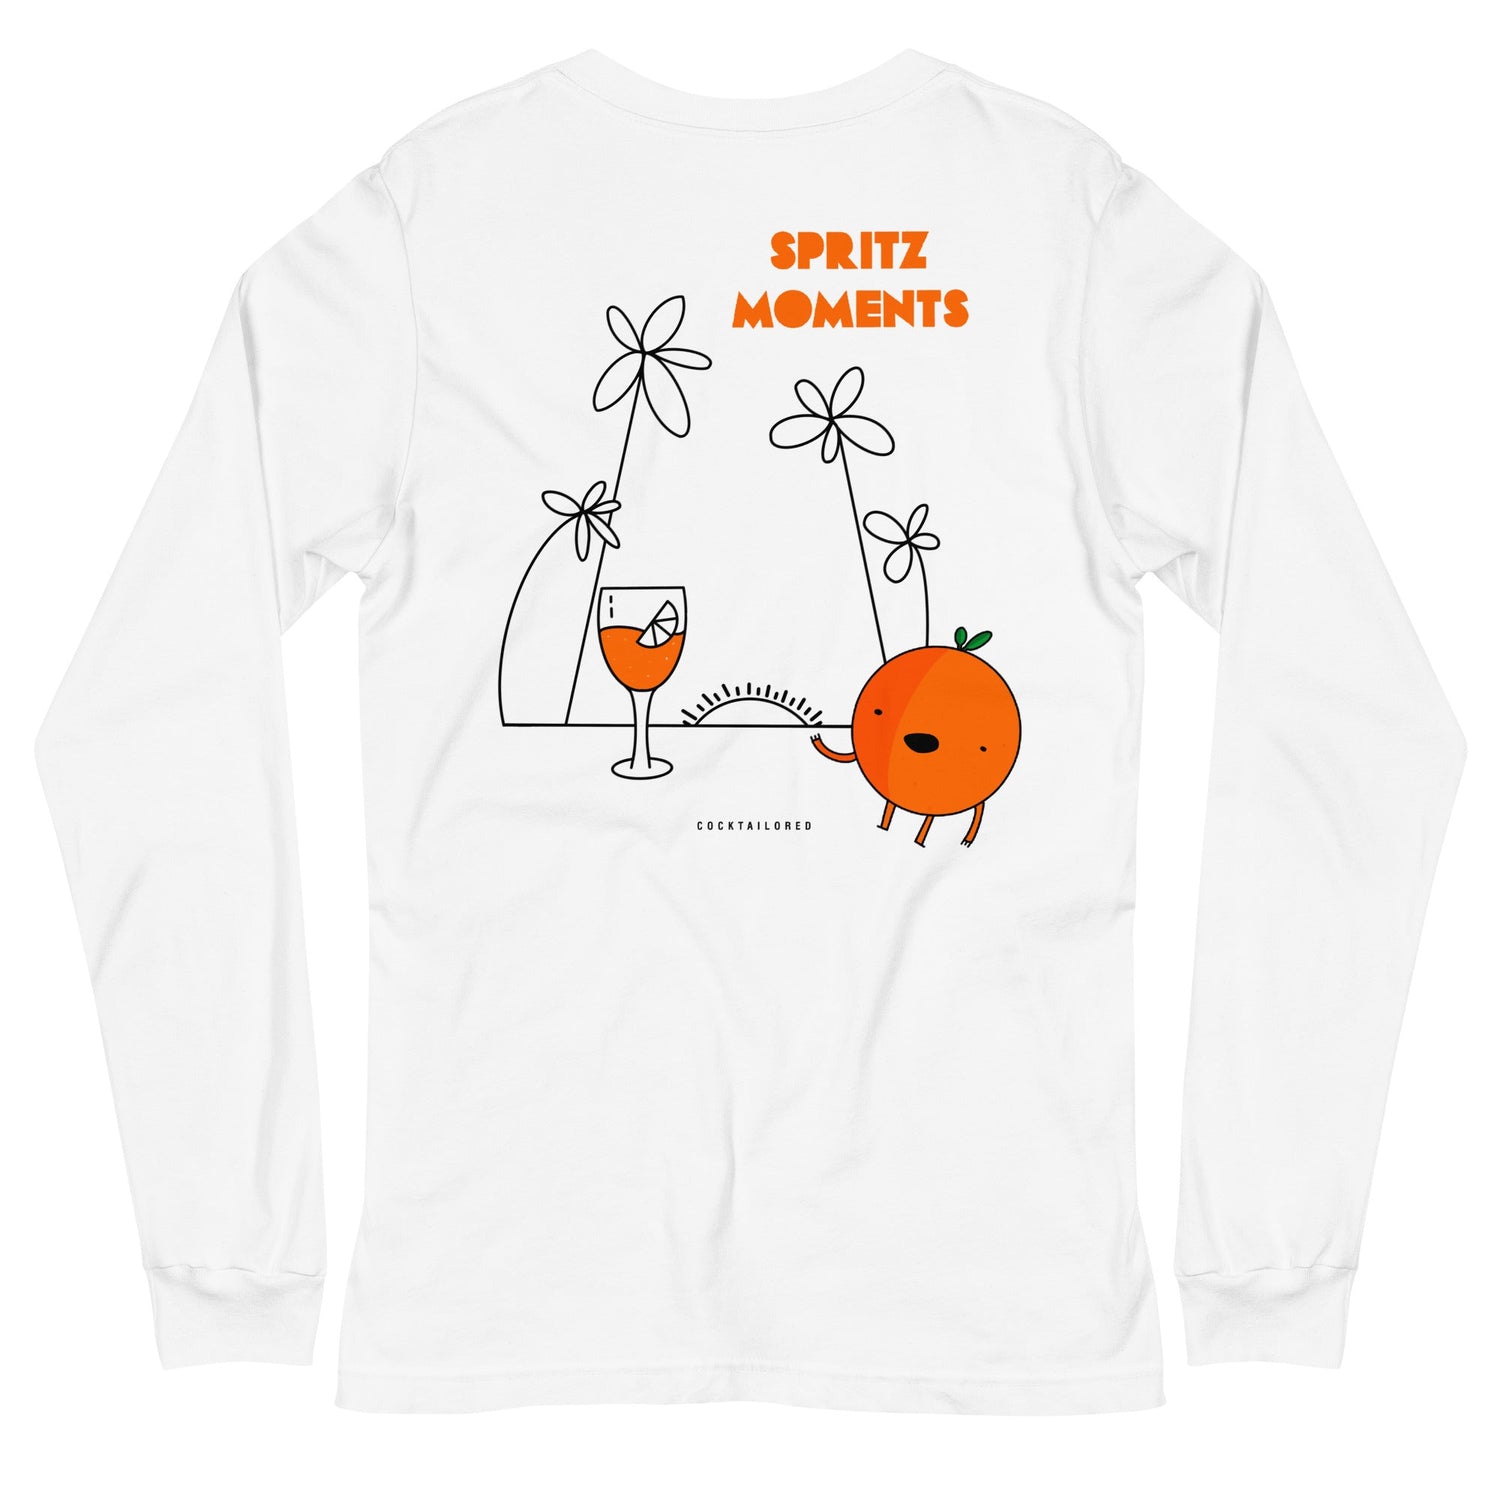 The Spritz Moments Long Sleeve Tee